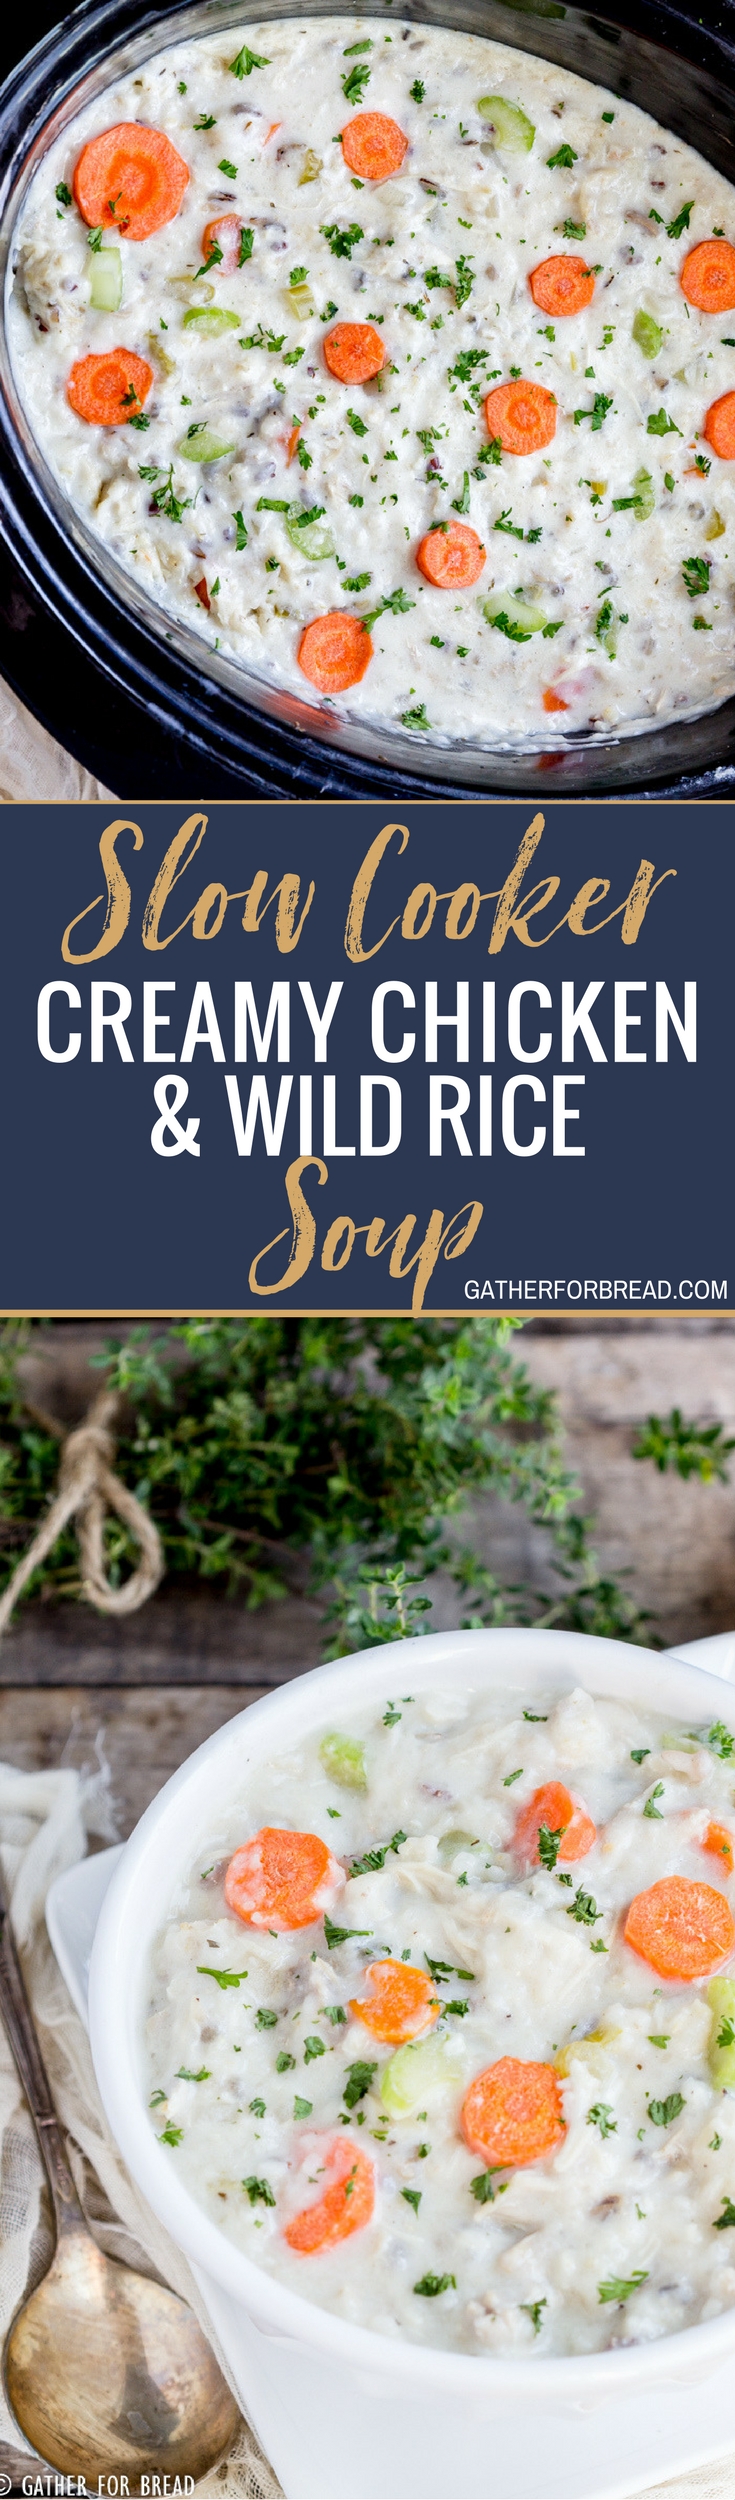 Slow Cooker Creamy Chicken Wild Rice Soup - Crockpot chicken wild rice soup, creamy chowder style soup. Homemade with boneless chicken and rice. Perfect comfort food for a chilly night. Serve with your favorite bread for a full meal! #chowder #soup #comfortfood #dinner #slowcooker #rice